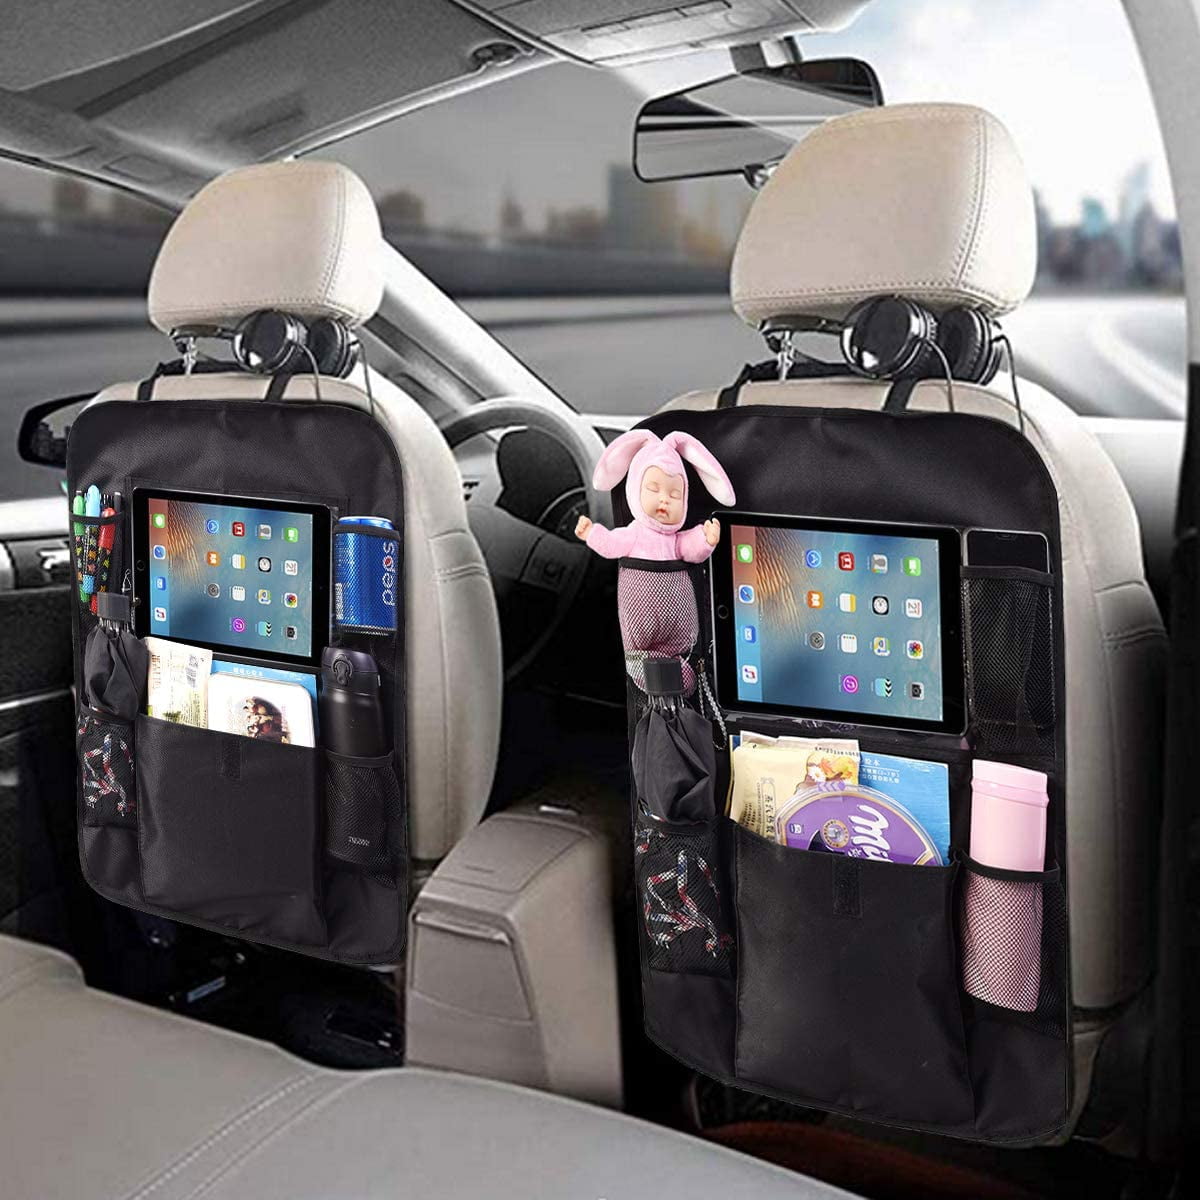 AFPANQZ 2X Butterflies Kick Mats Back Seat Protector Waterproof Car Seat Organizer Kick Mats Muti-Pocket Back Seat Storage Bag with Touch Screen Phone Holder to Organize Toy Bottle Snacks Books Pink 